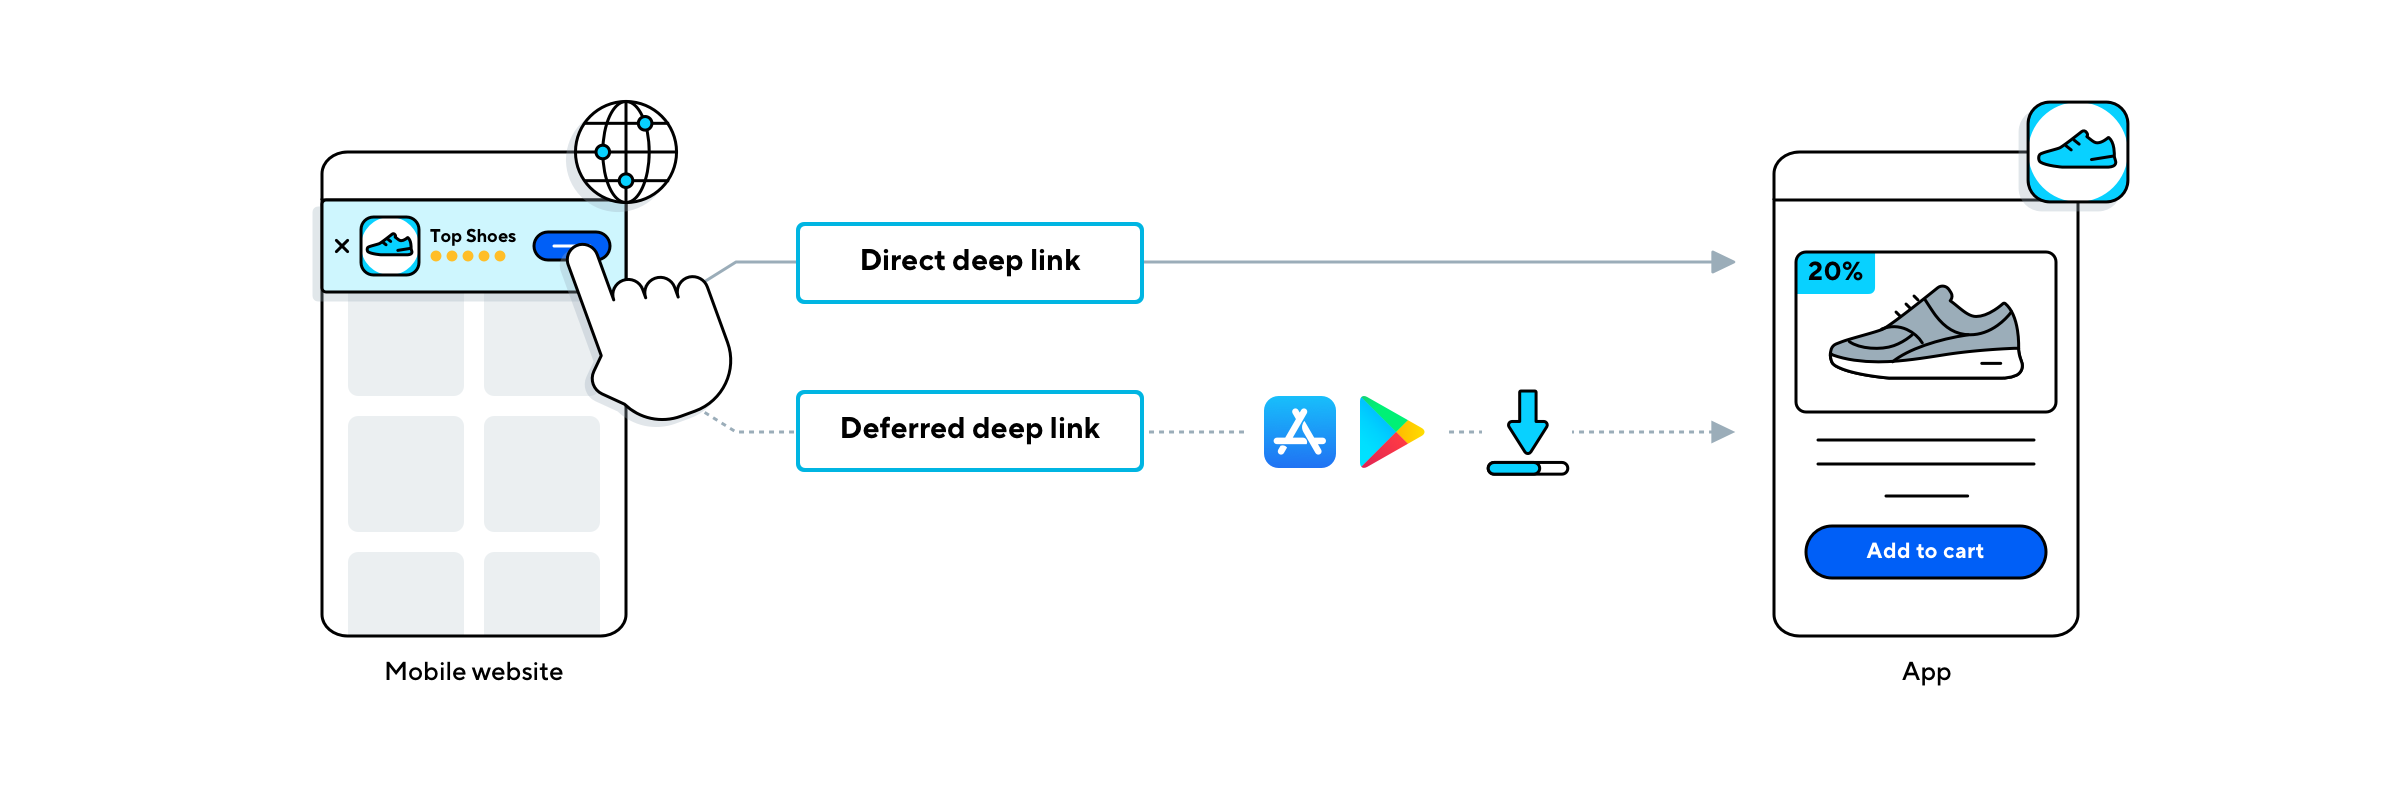 A graphic showing how users interact with a smart banner in a mobile web environment and can be linked directly to the corresponding product page in your app.